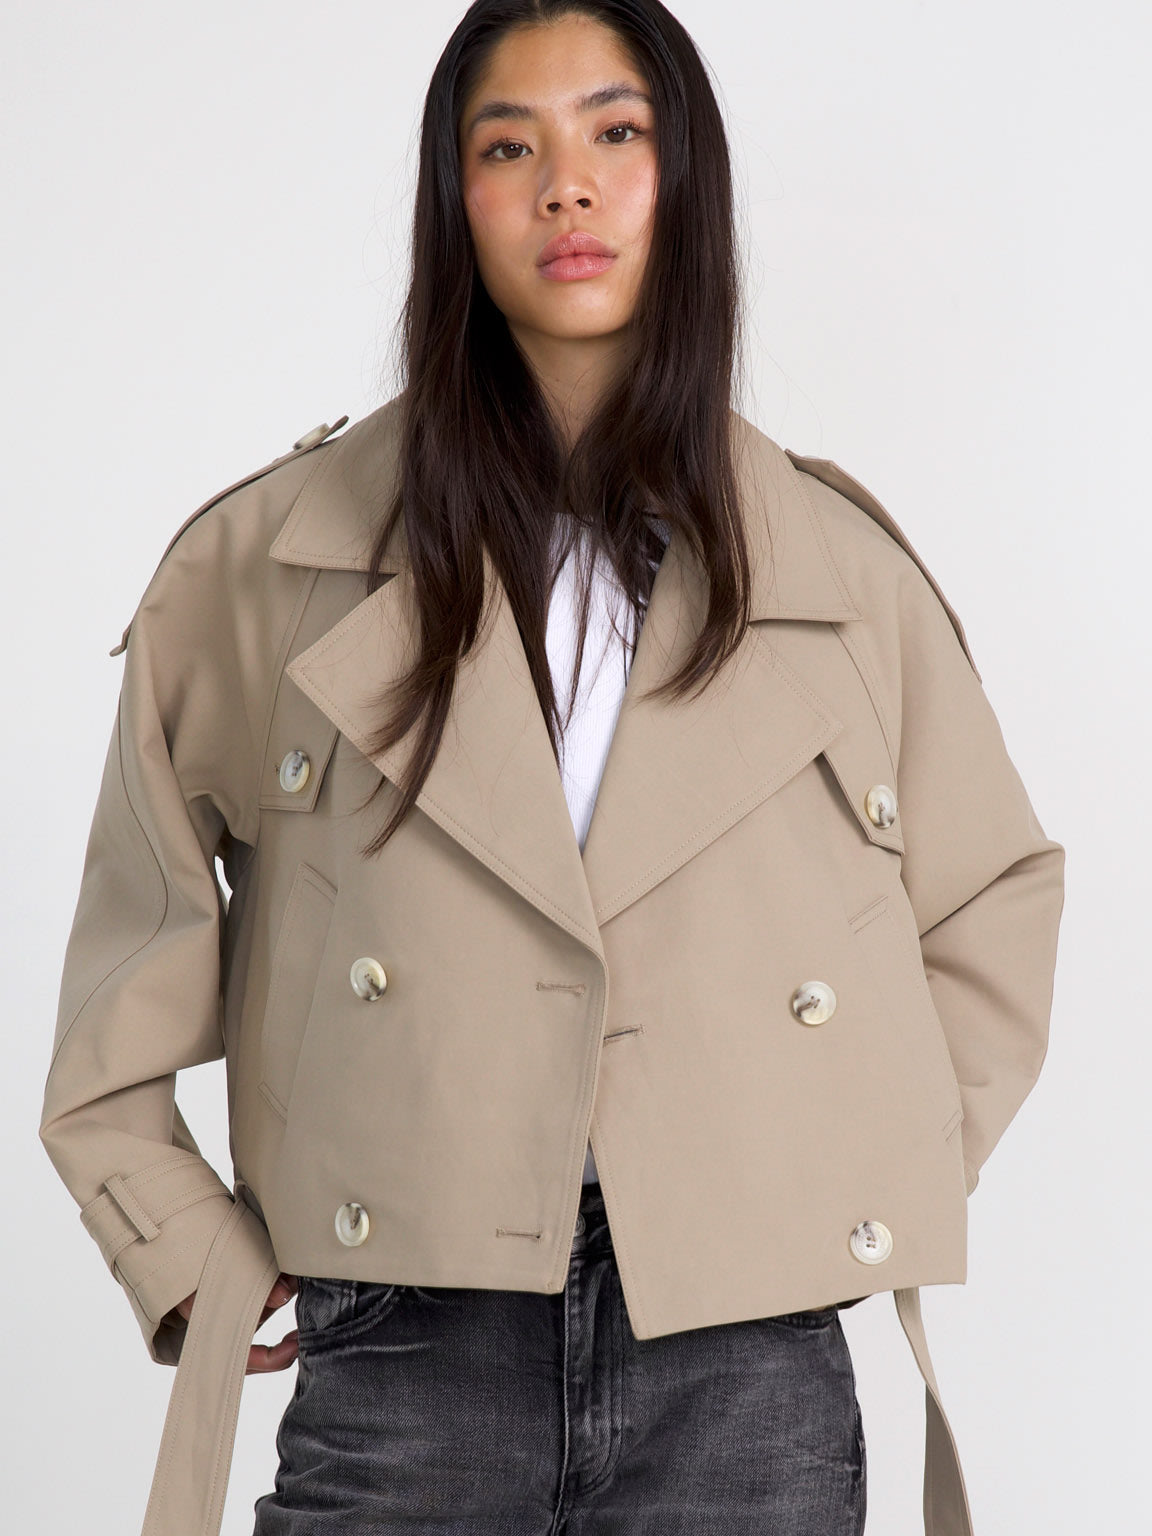 BOBBY CANVAS TRENCHJACKET - BEIGE